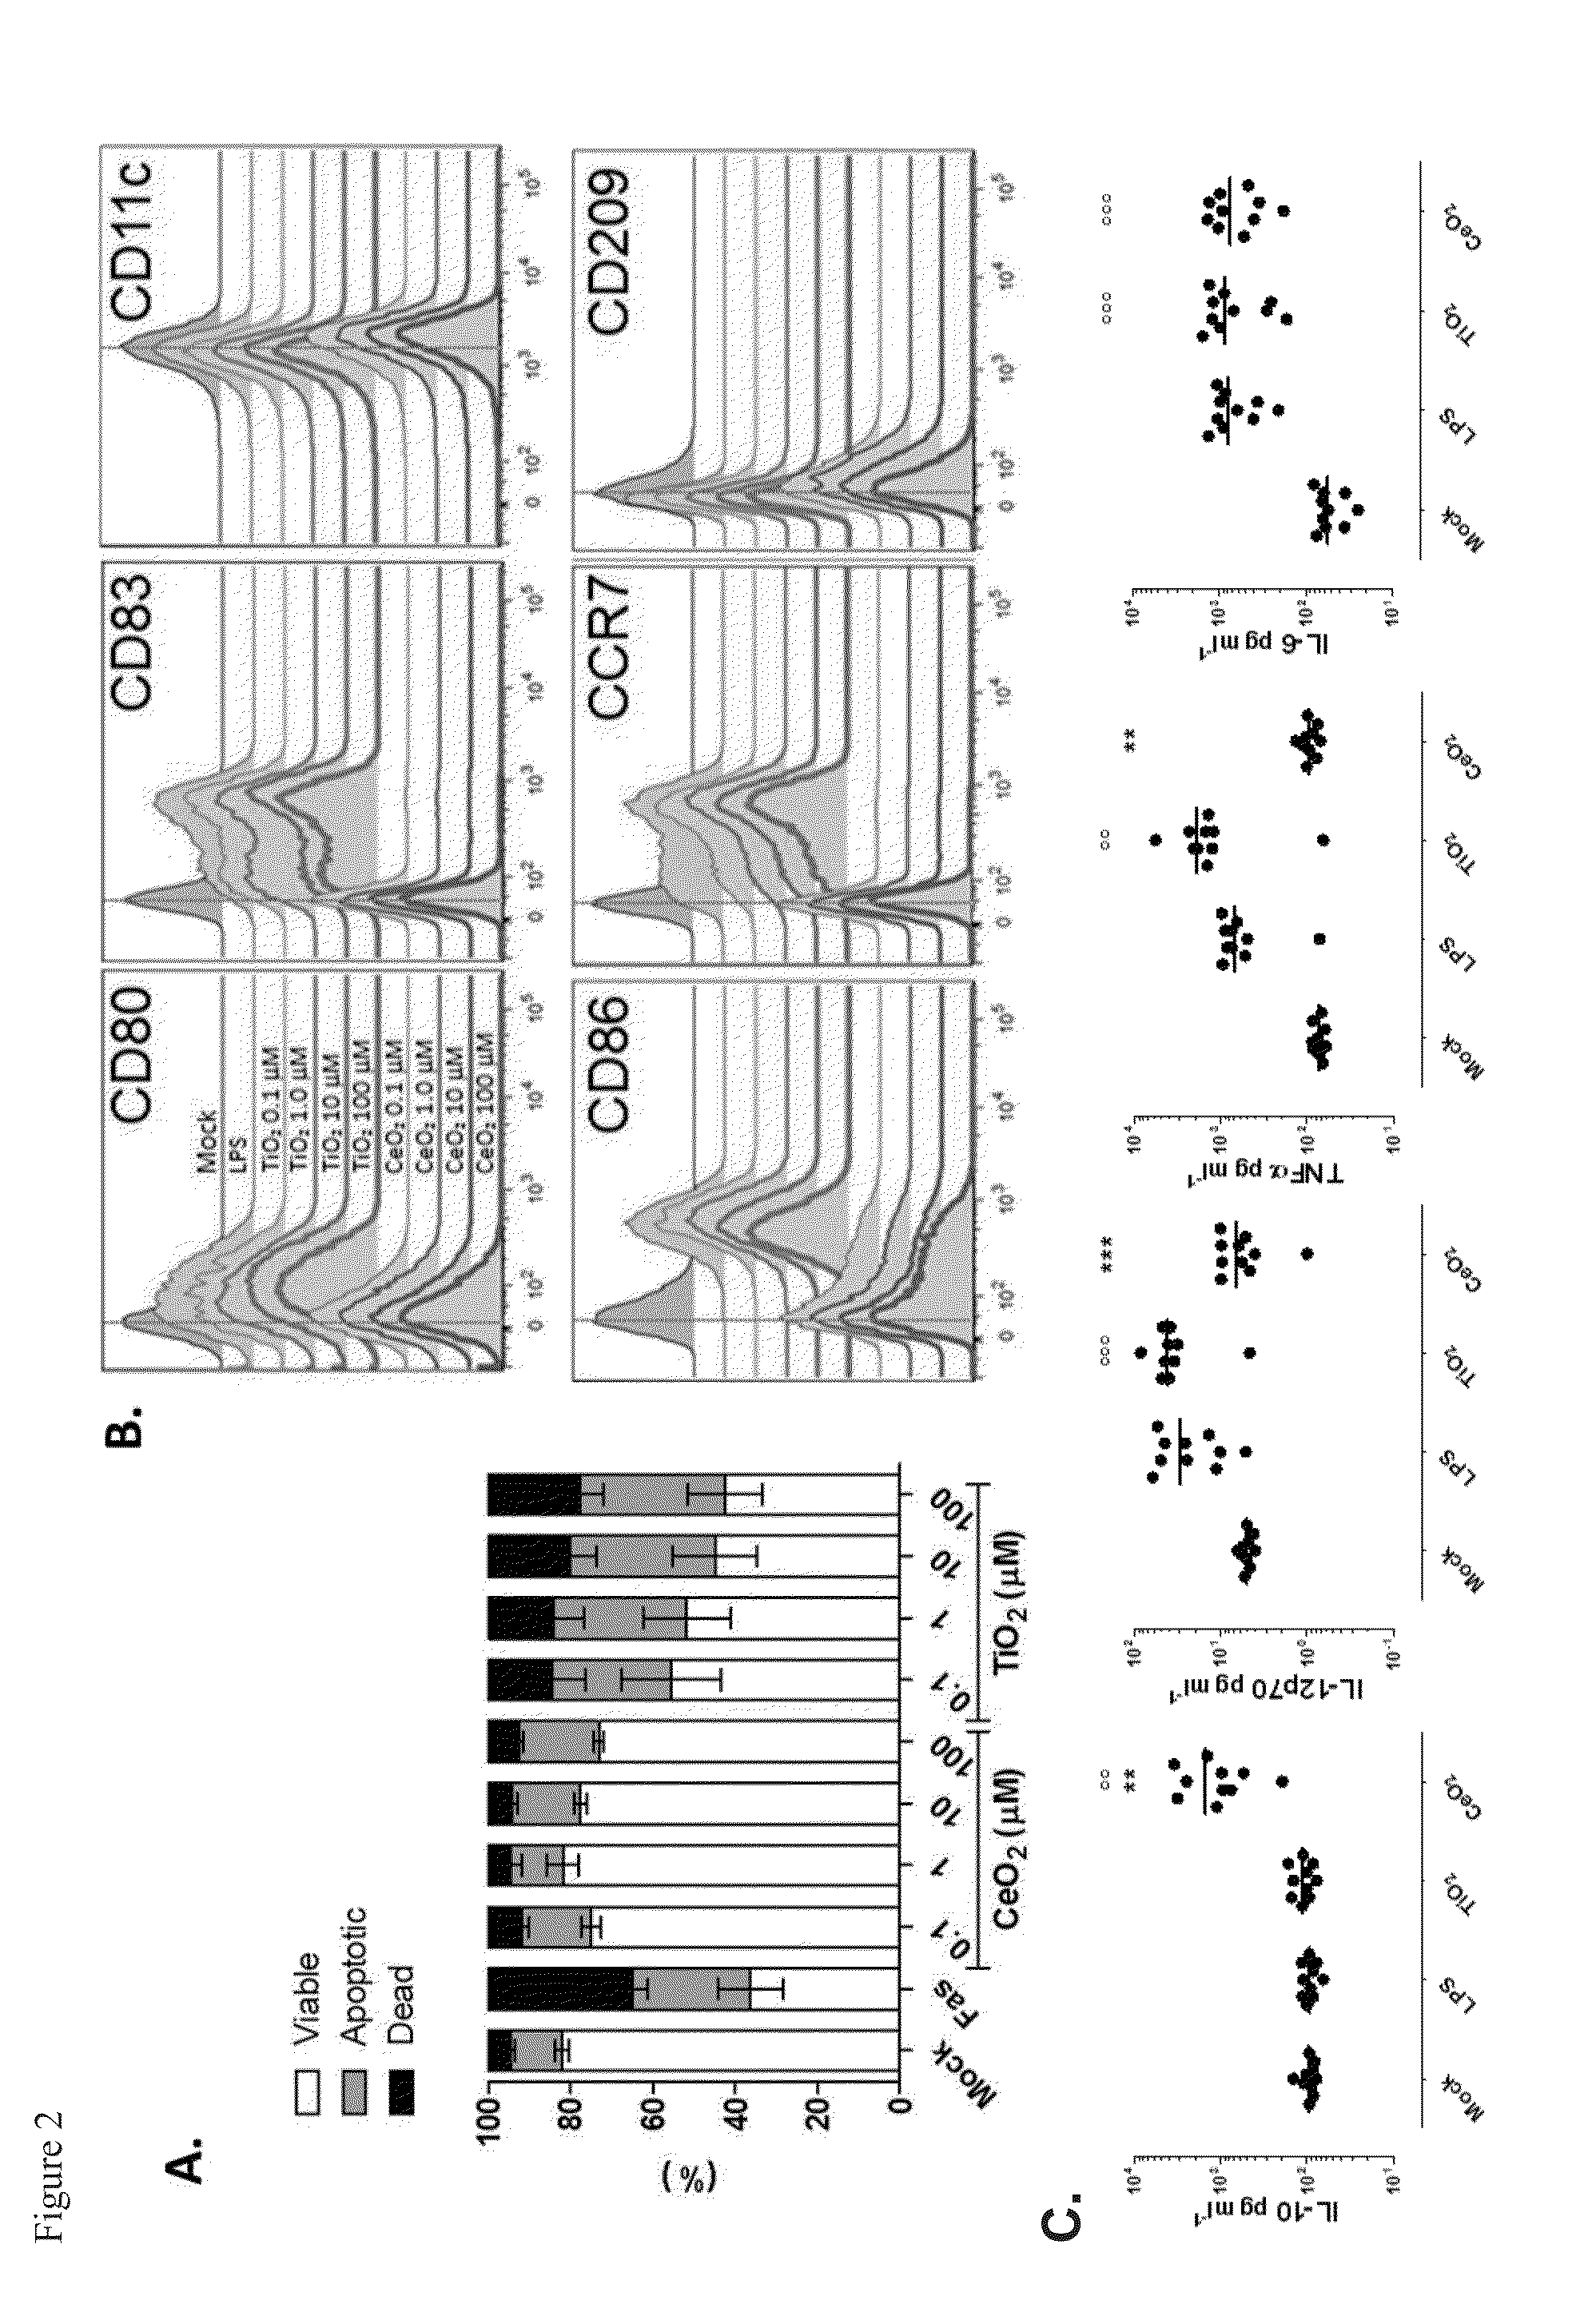 Methods of using ceo2 and tio2 nanoparticles in modulation of the immune system